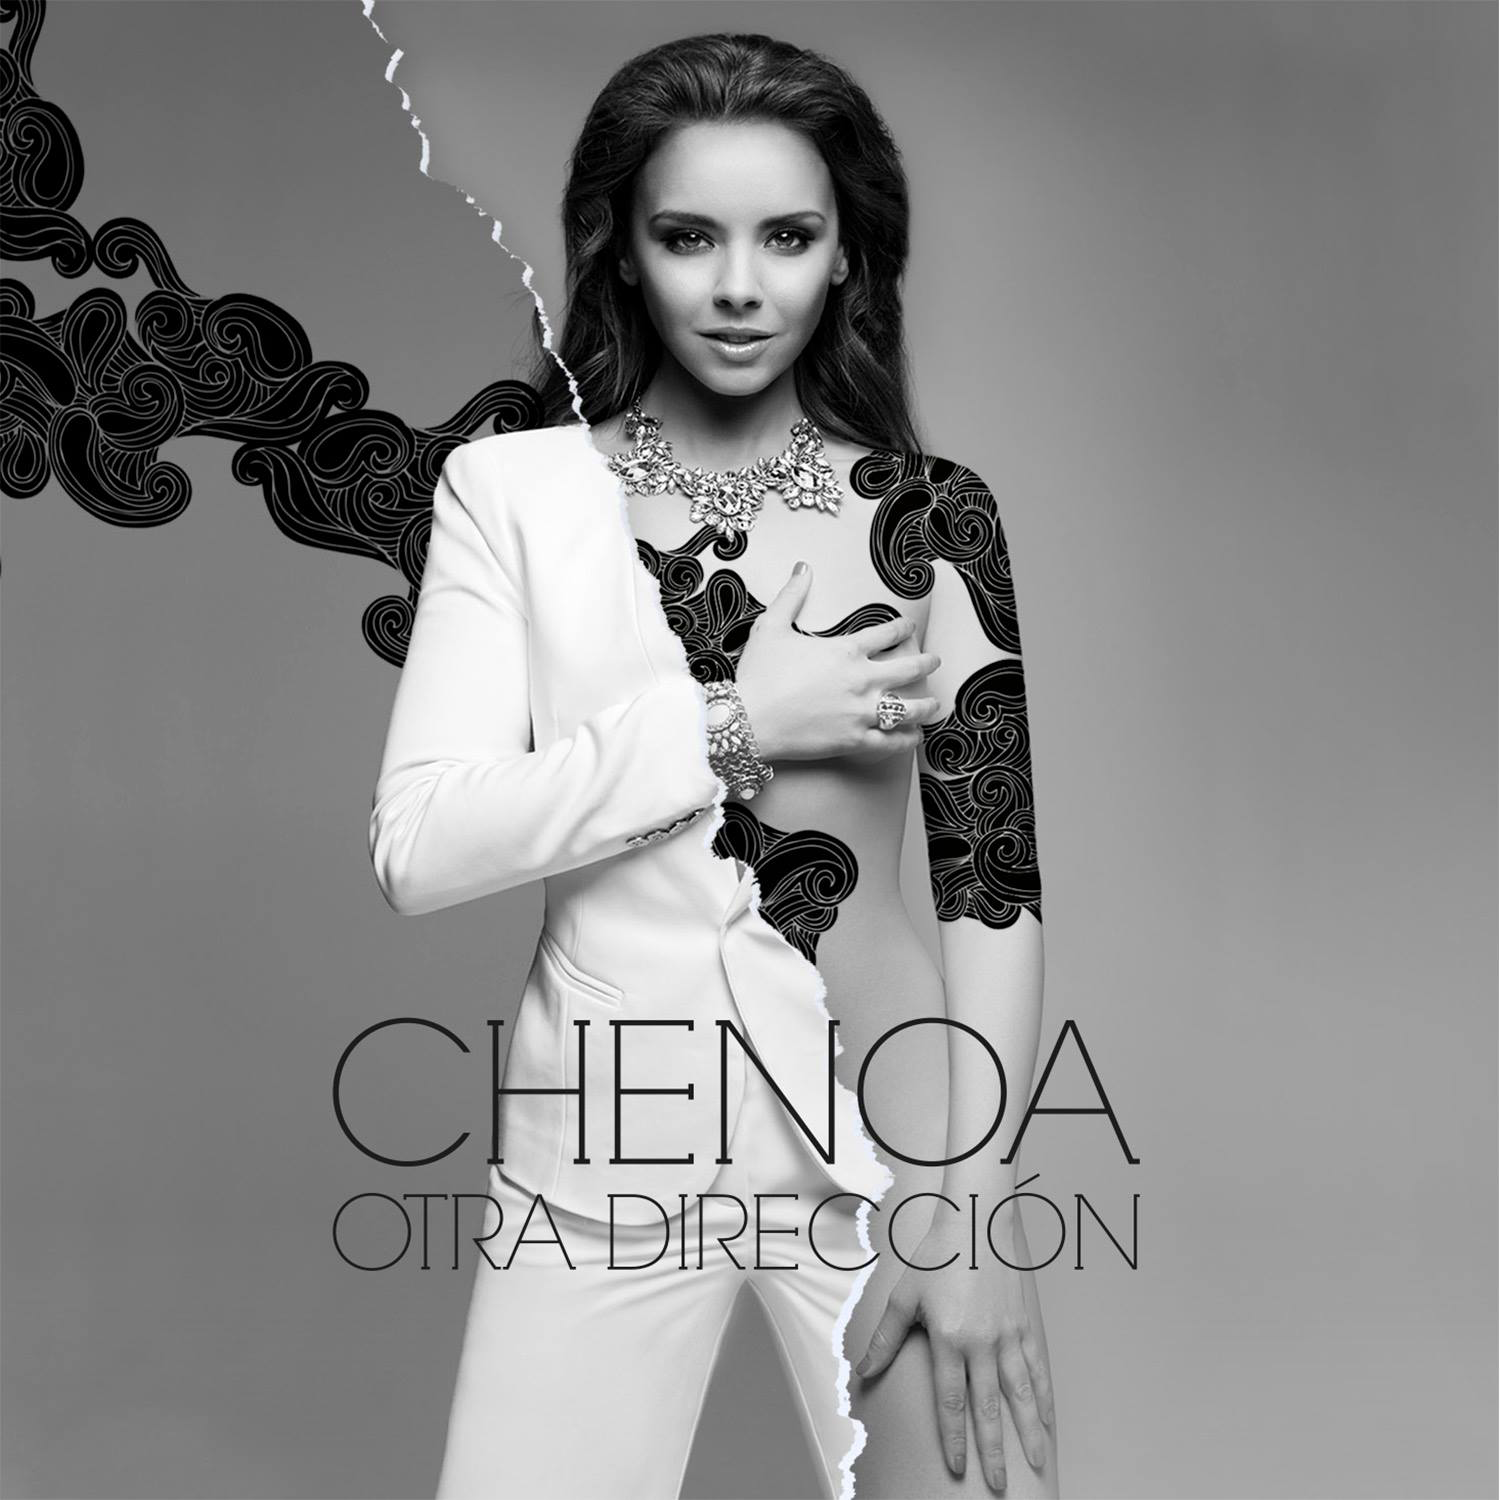 News Added Aug 17, 2013 “Otra Dirección” (English: “Another Direction”) is the upcoming sixth studio album by Spanish singer Chenoa. The album is scheduled for release on 17 September via Alias Music S.L. and it comes preceded by the lead single “Quinta Dimensión”, and its English version “Life’s an Equation”, released in late-June. The official […]